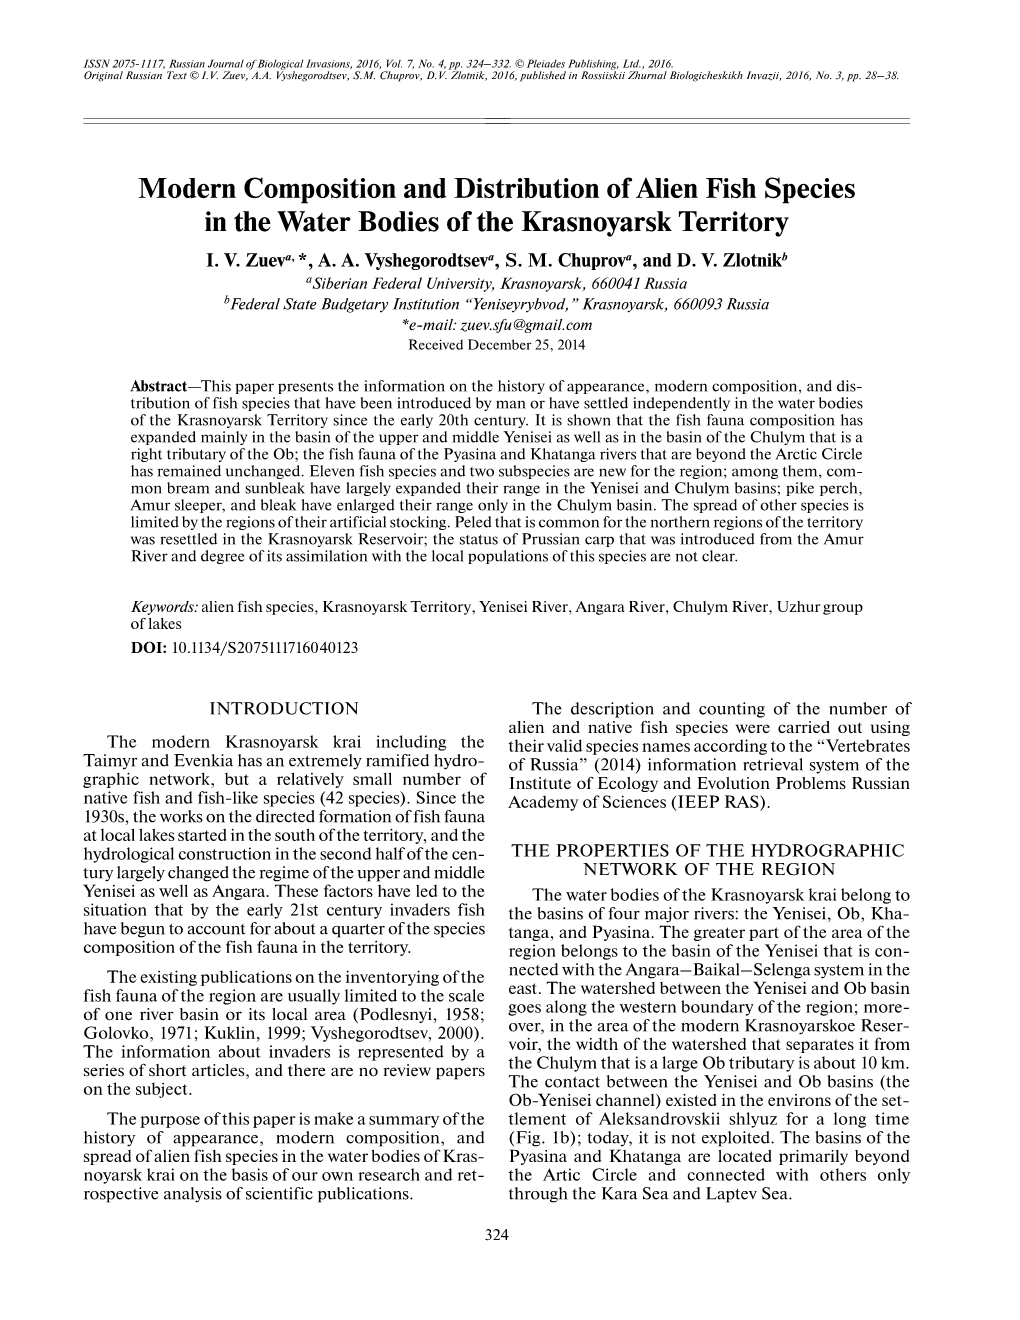 Modern Composition and Distribution of Alien Fish Species in the Water Bodies of the Krasnoyarsk Territory I